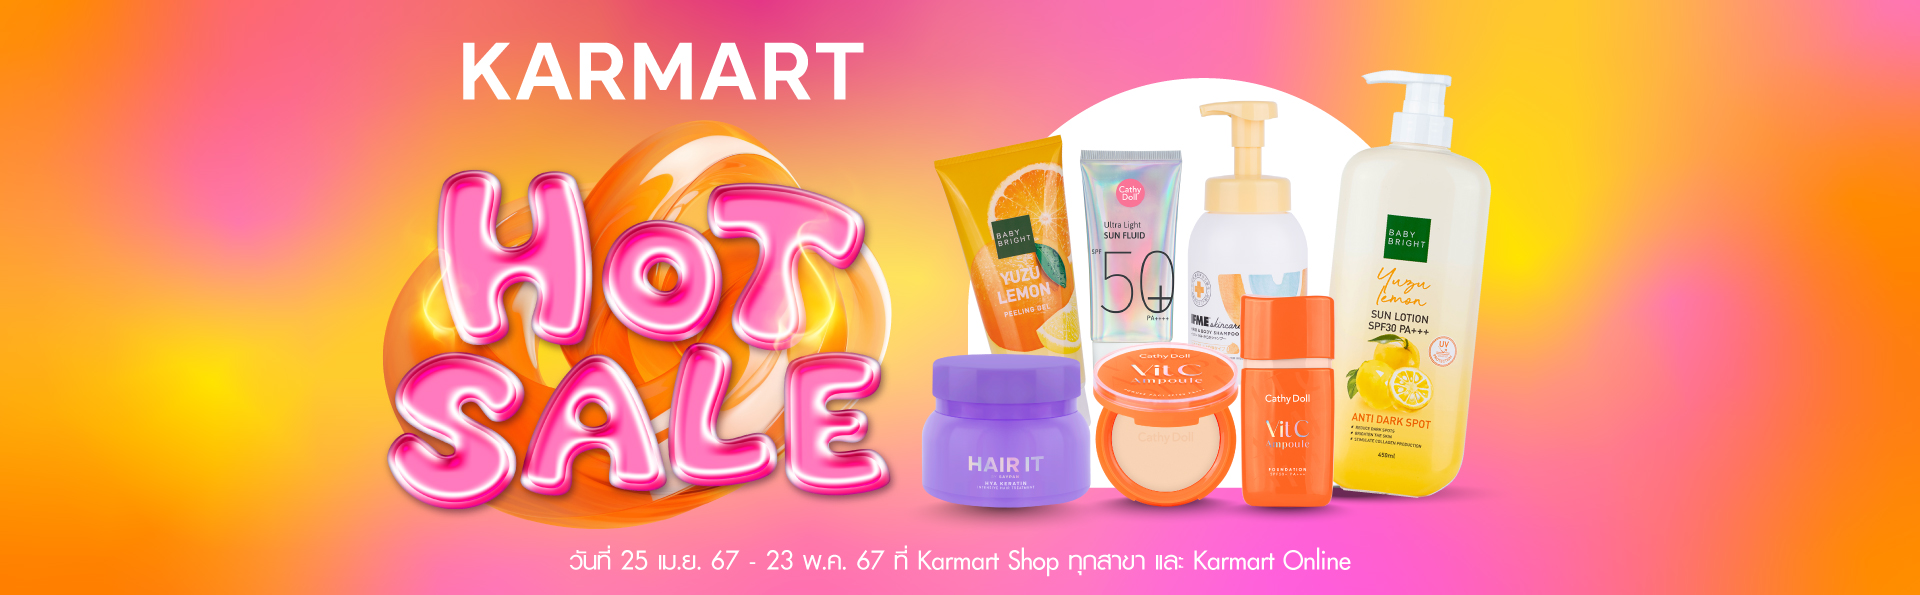 Hot Sale up to 50%